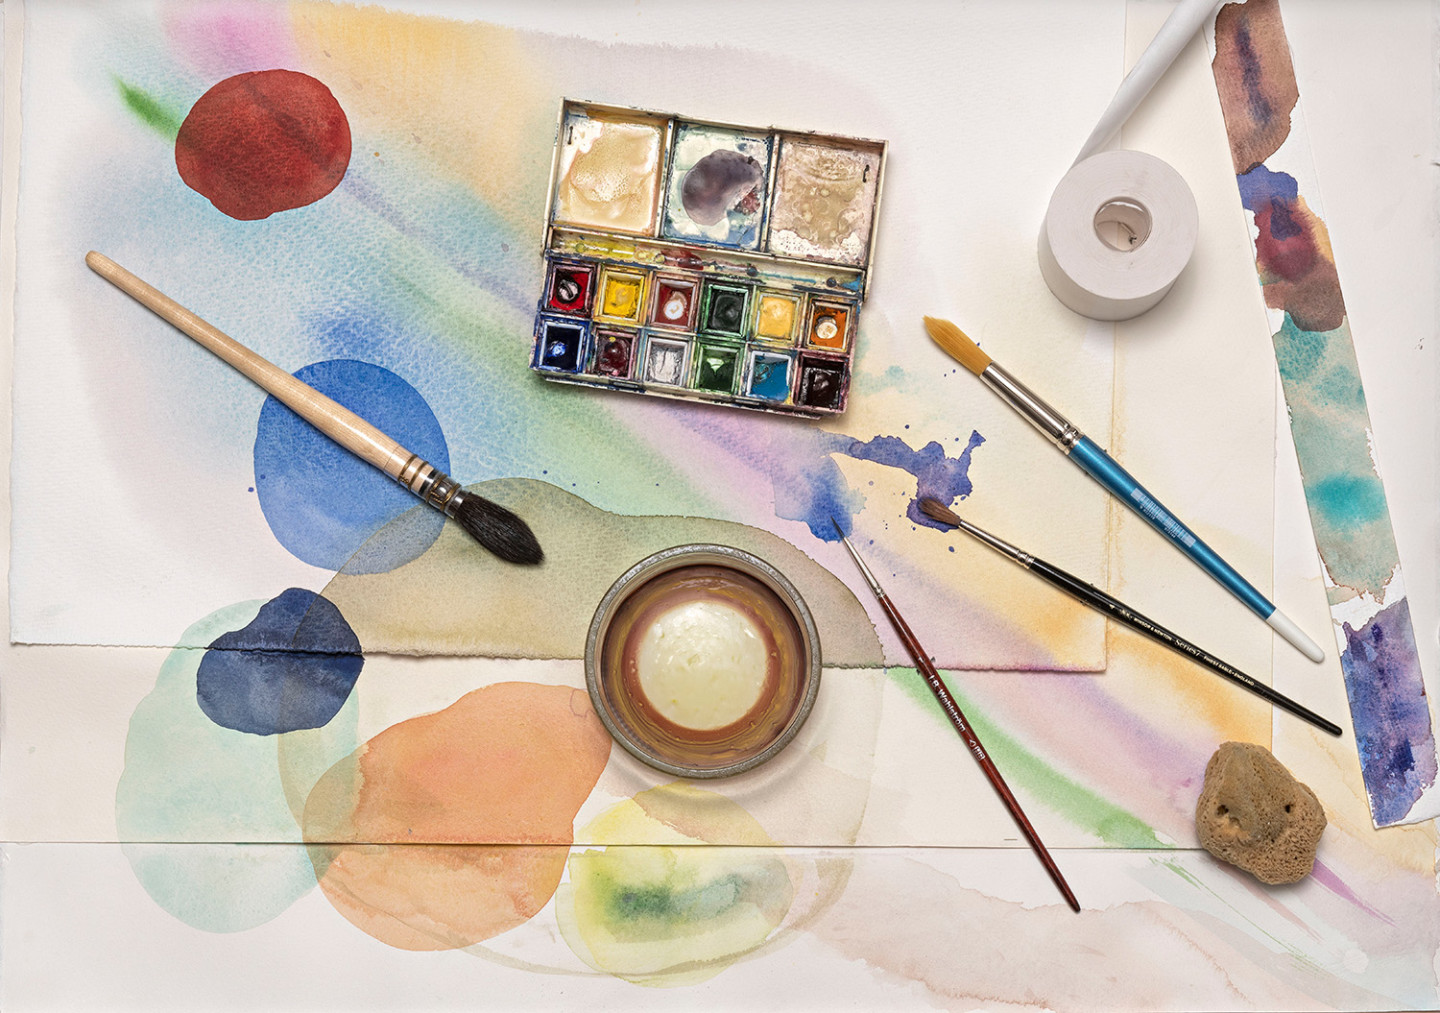 Watercolor painting with circles in different colors. There are brushes, a palette, masking tape and a glass of water placed around the painting.